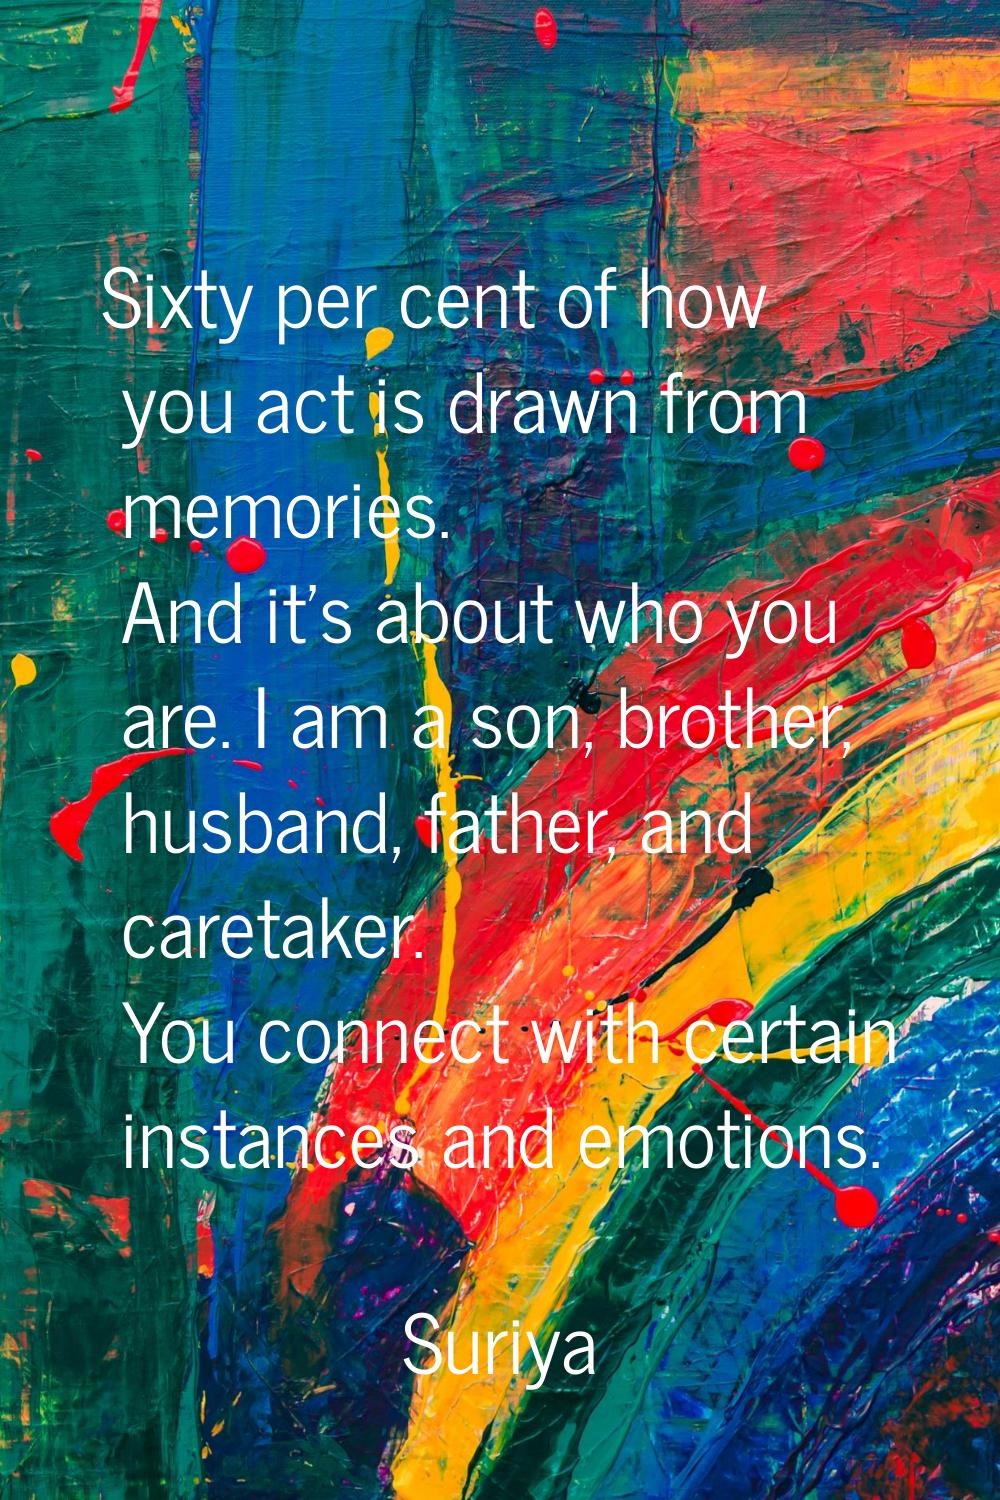 Sixty per cent of how you act is drawn from memories. And it's about who you are. I am a son, broth